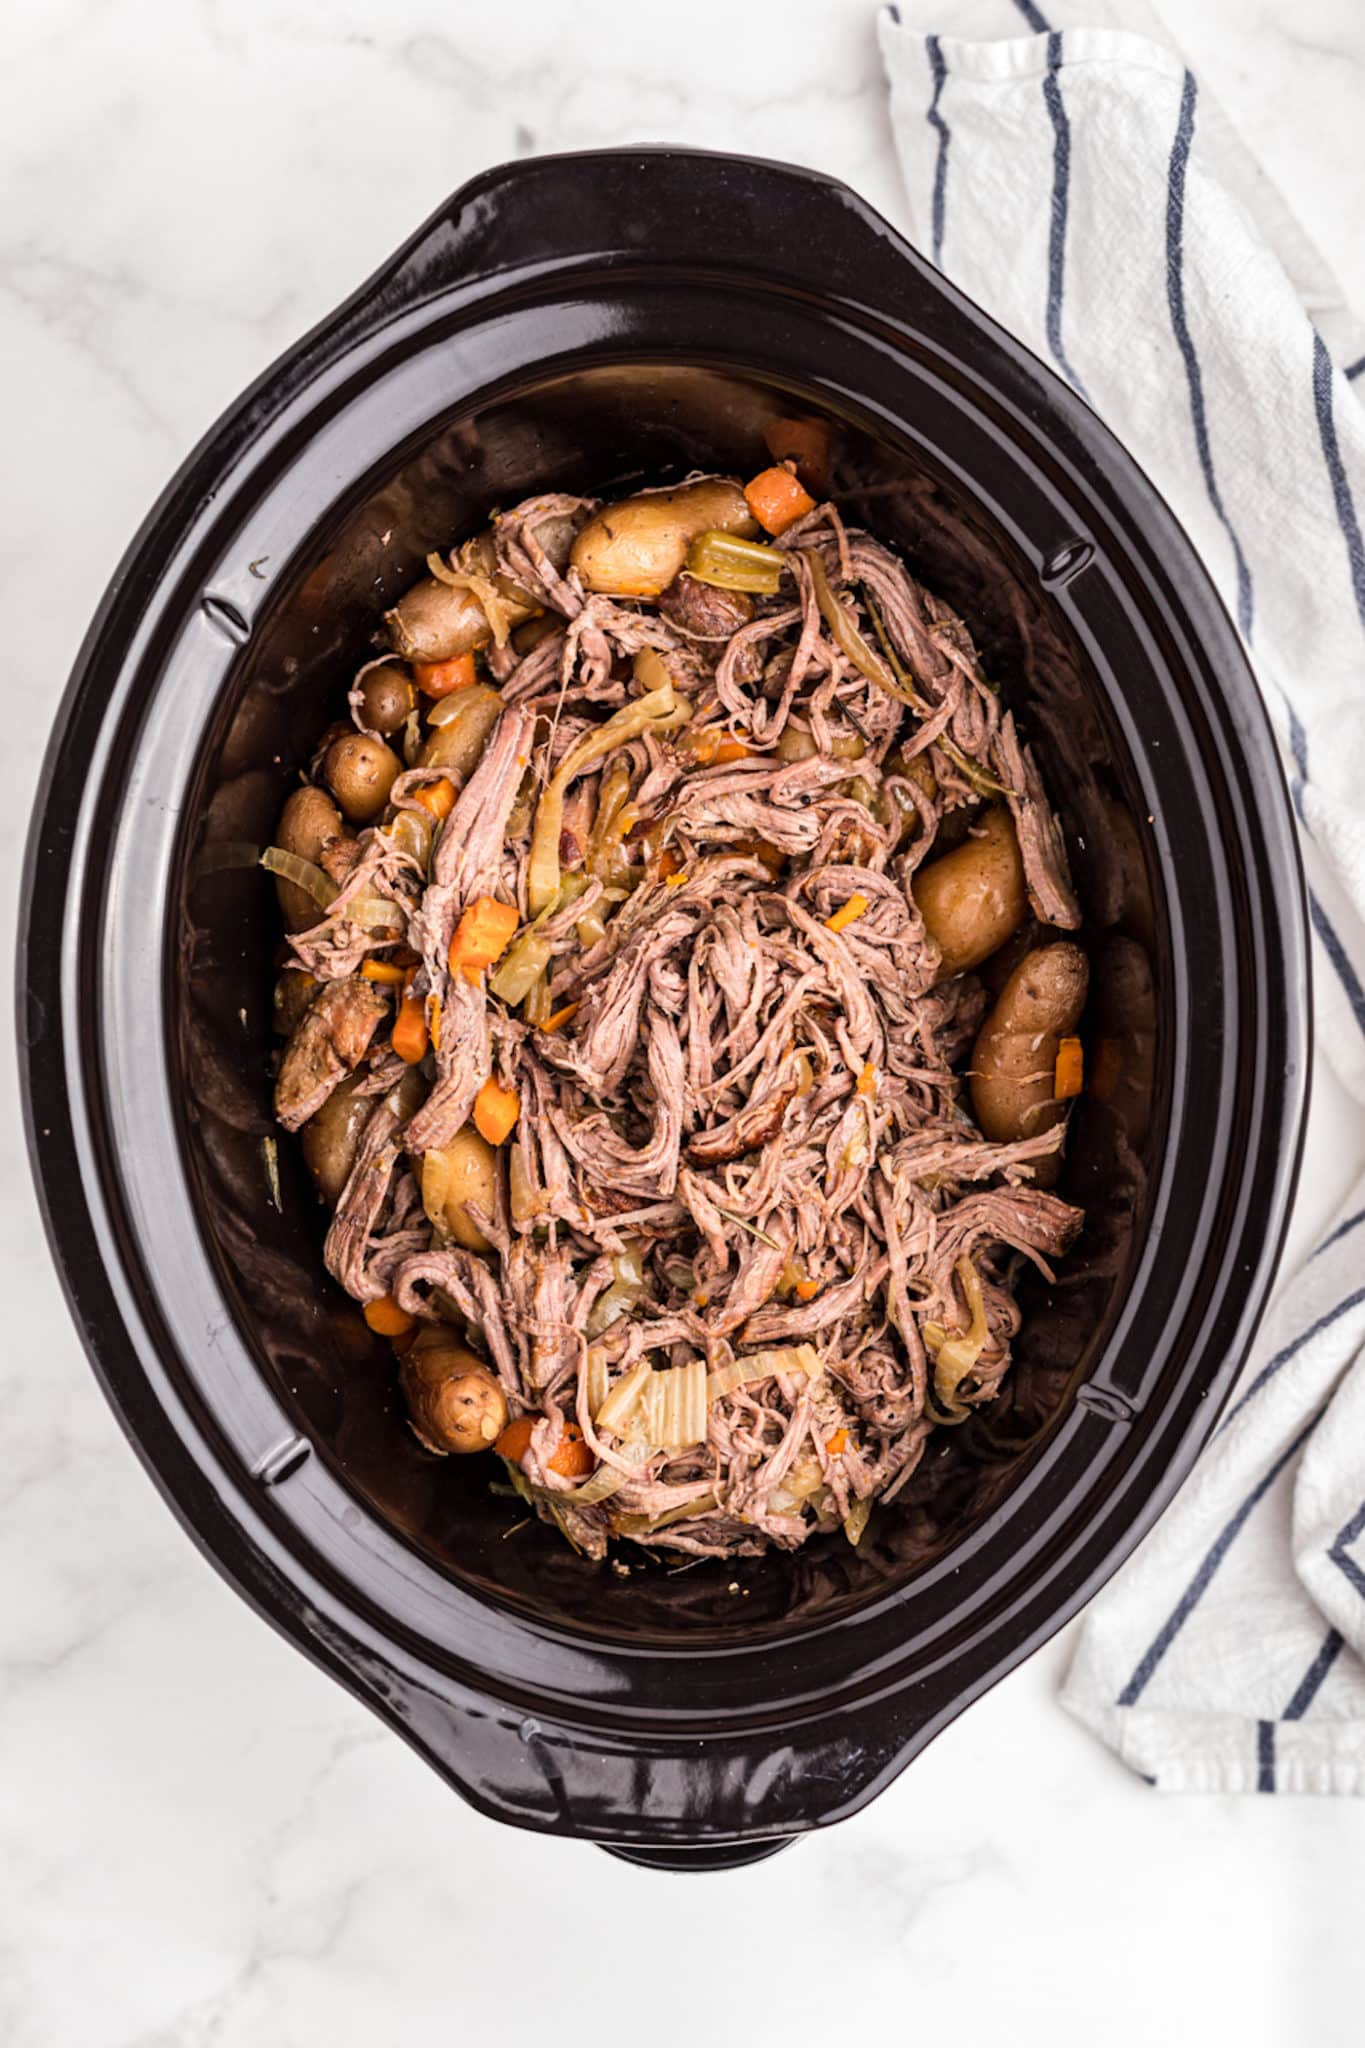 shredded tri tip with veggies in slow cooker.